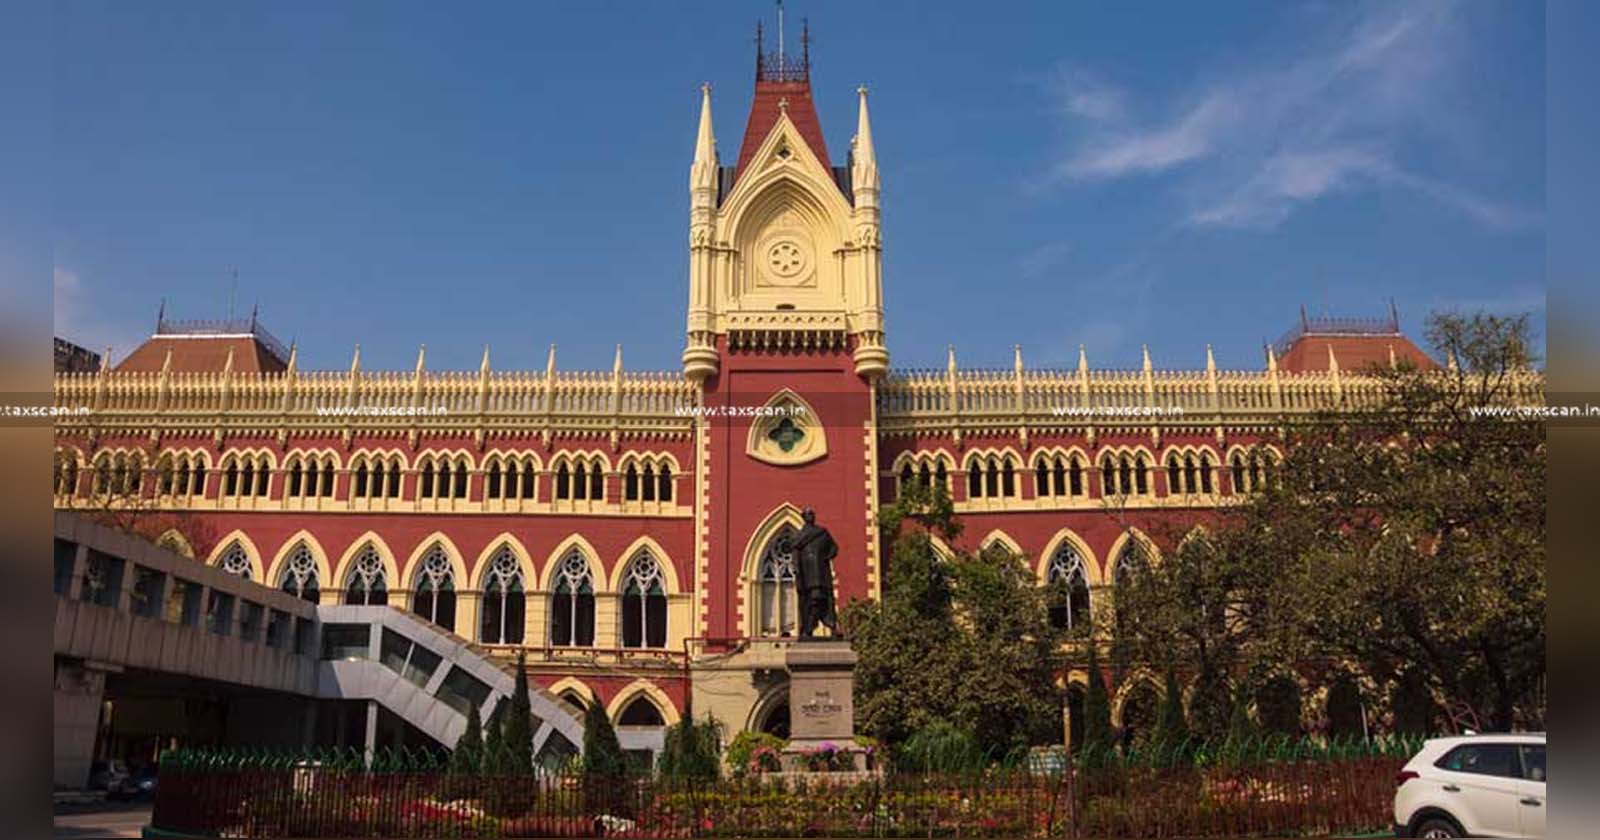 Cash Credit Account -Debt and Cannot be Made Attachable -Calcutta High Court- Attachment Order-taxscan